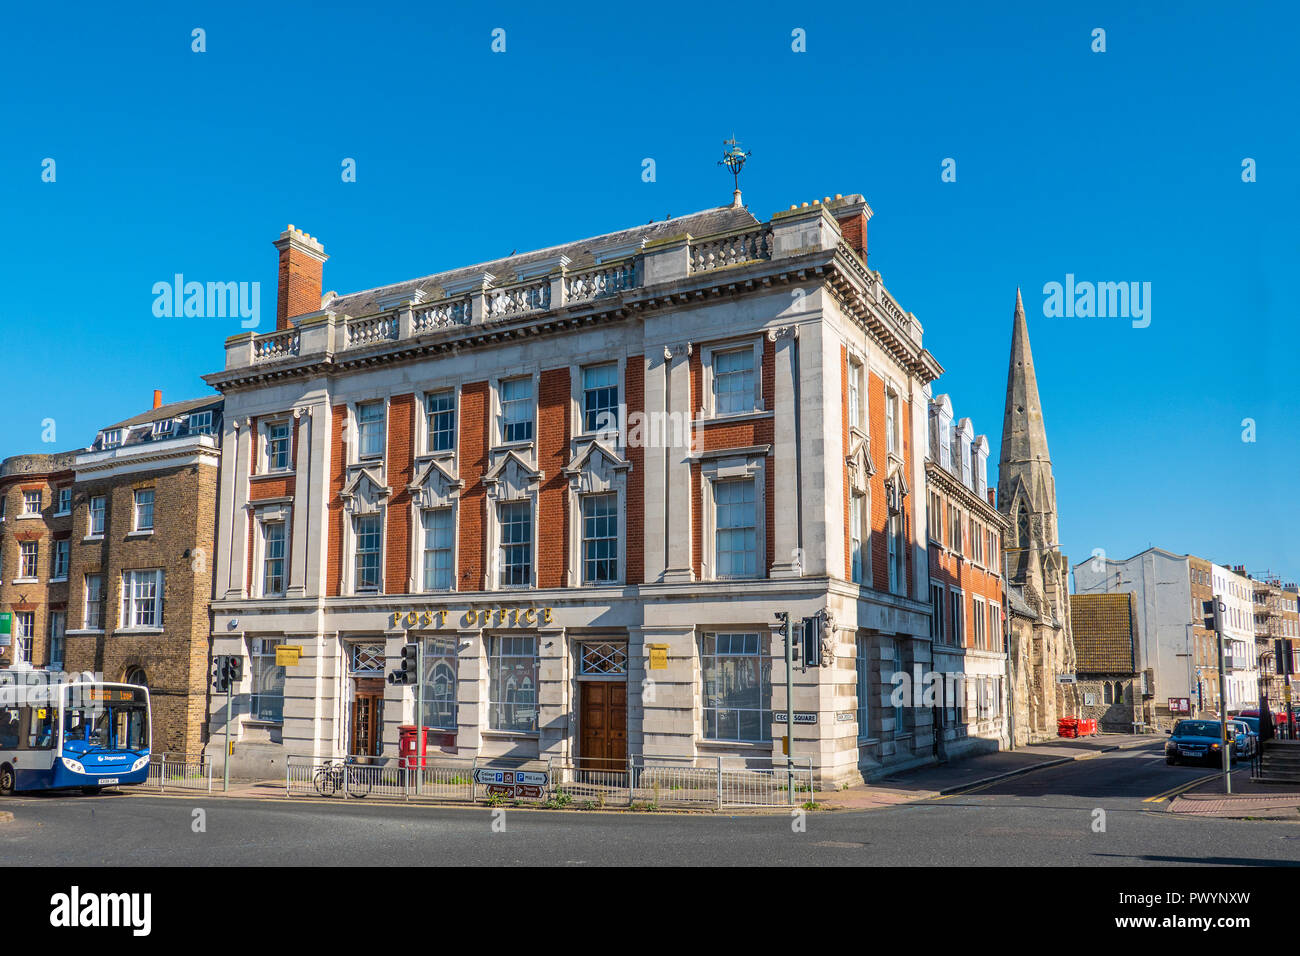 The Old Post Office Restaurant,Cecil Square,Margate,Thanet,Kent,England,UK Stock Photo